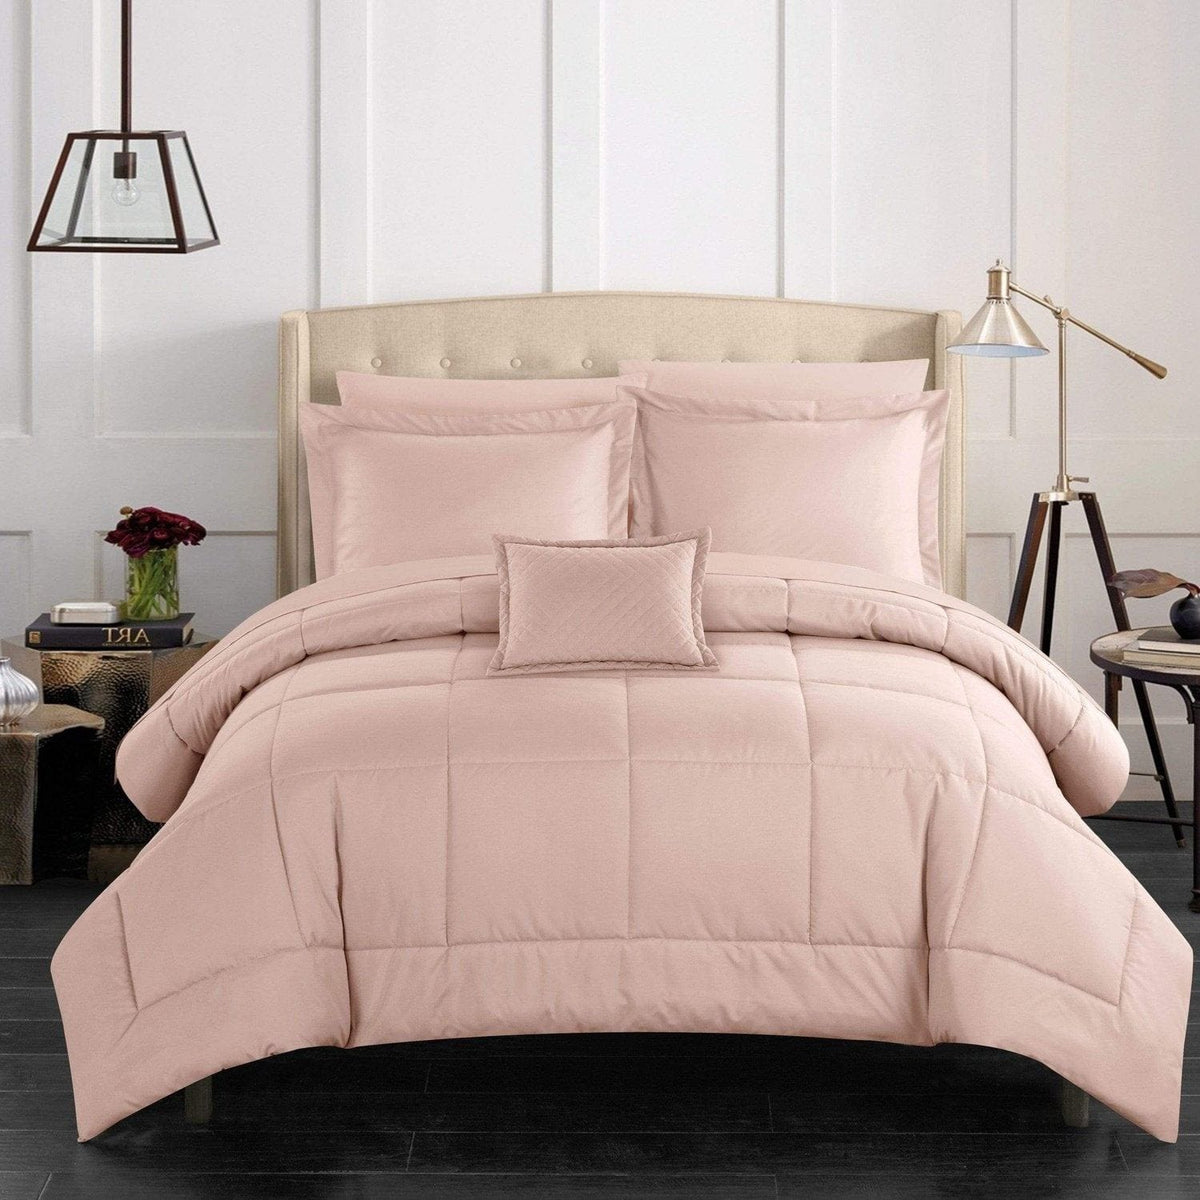 Chic Home Jordyn 8 Piece Stitched Comforter Set Coral